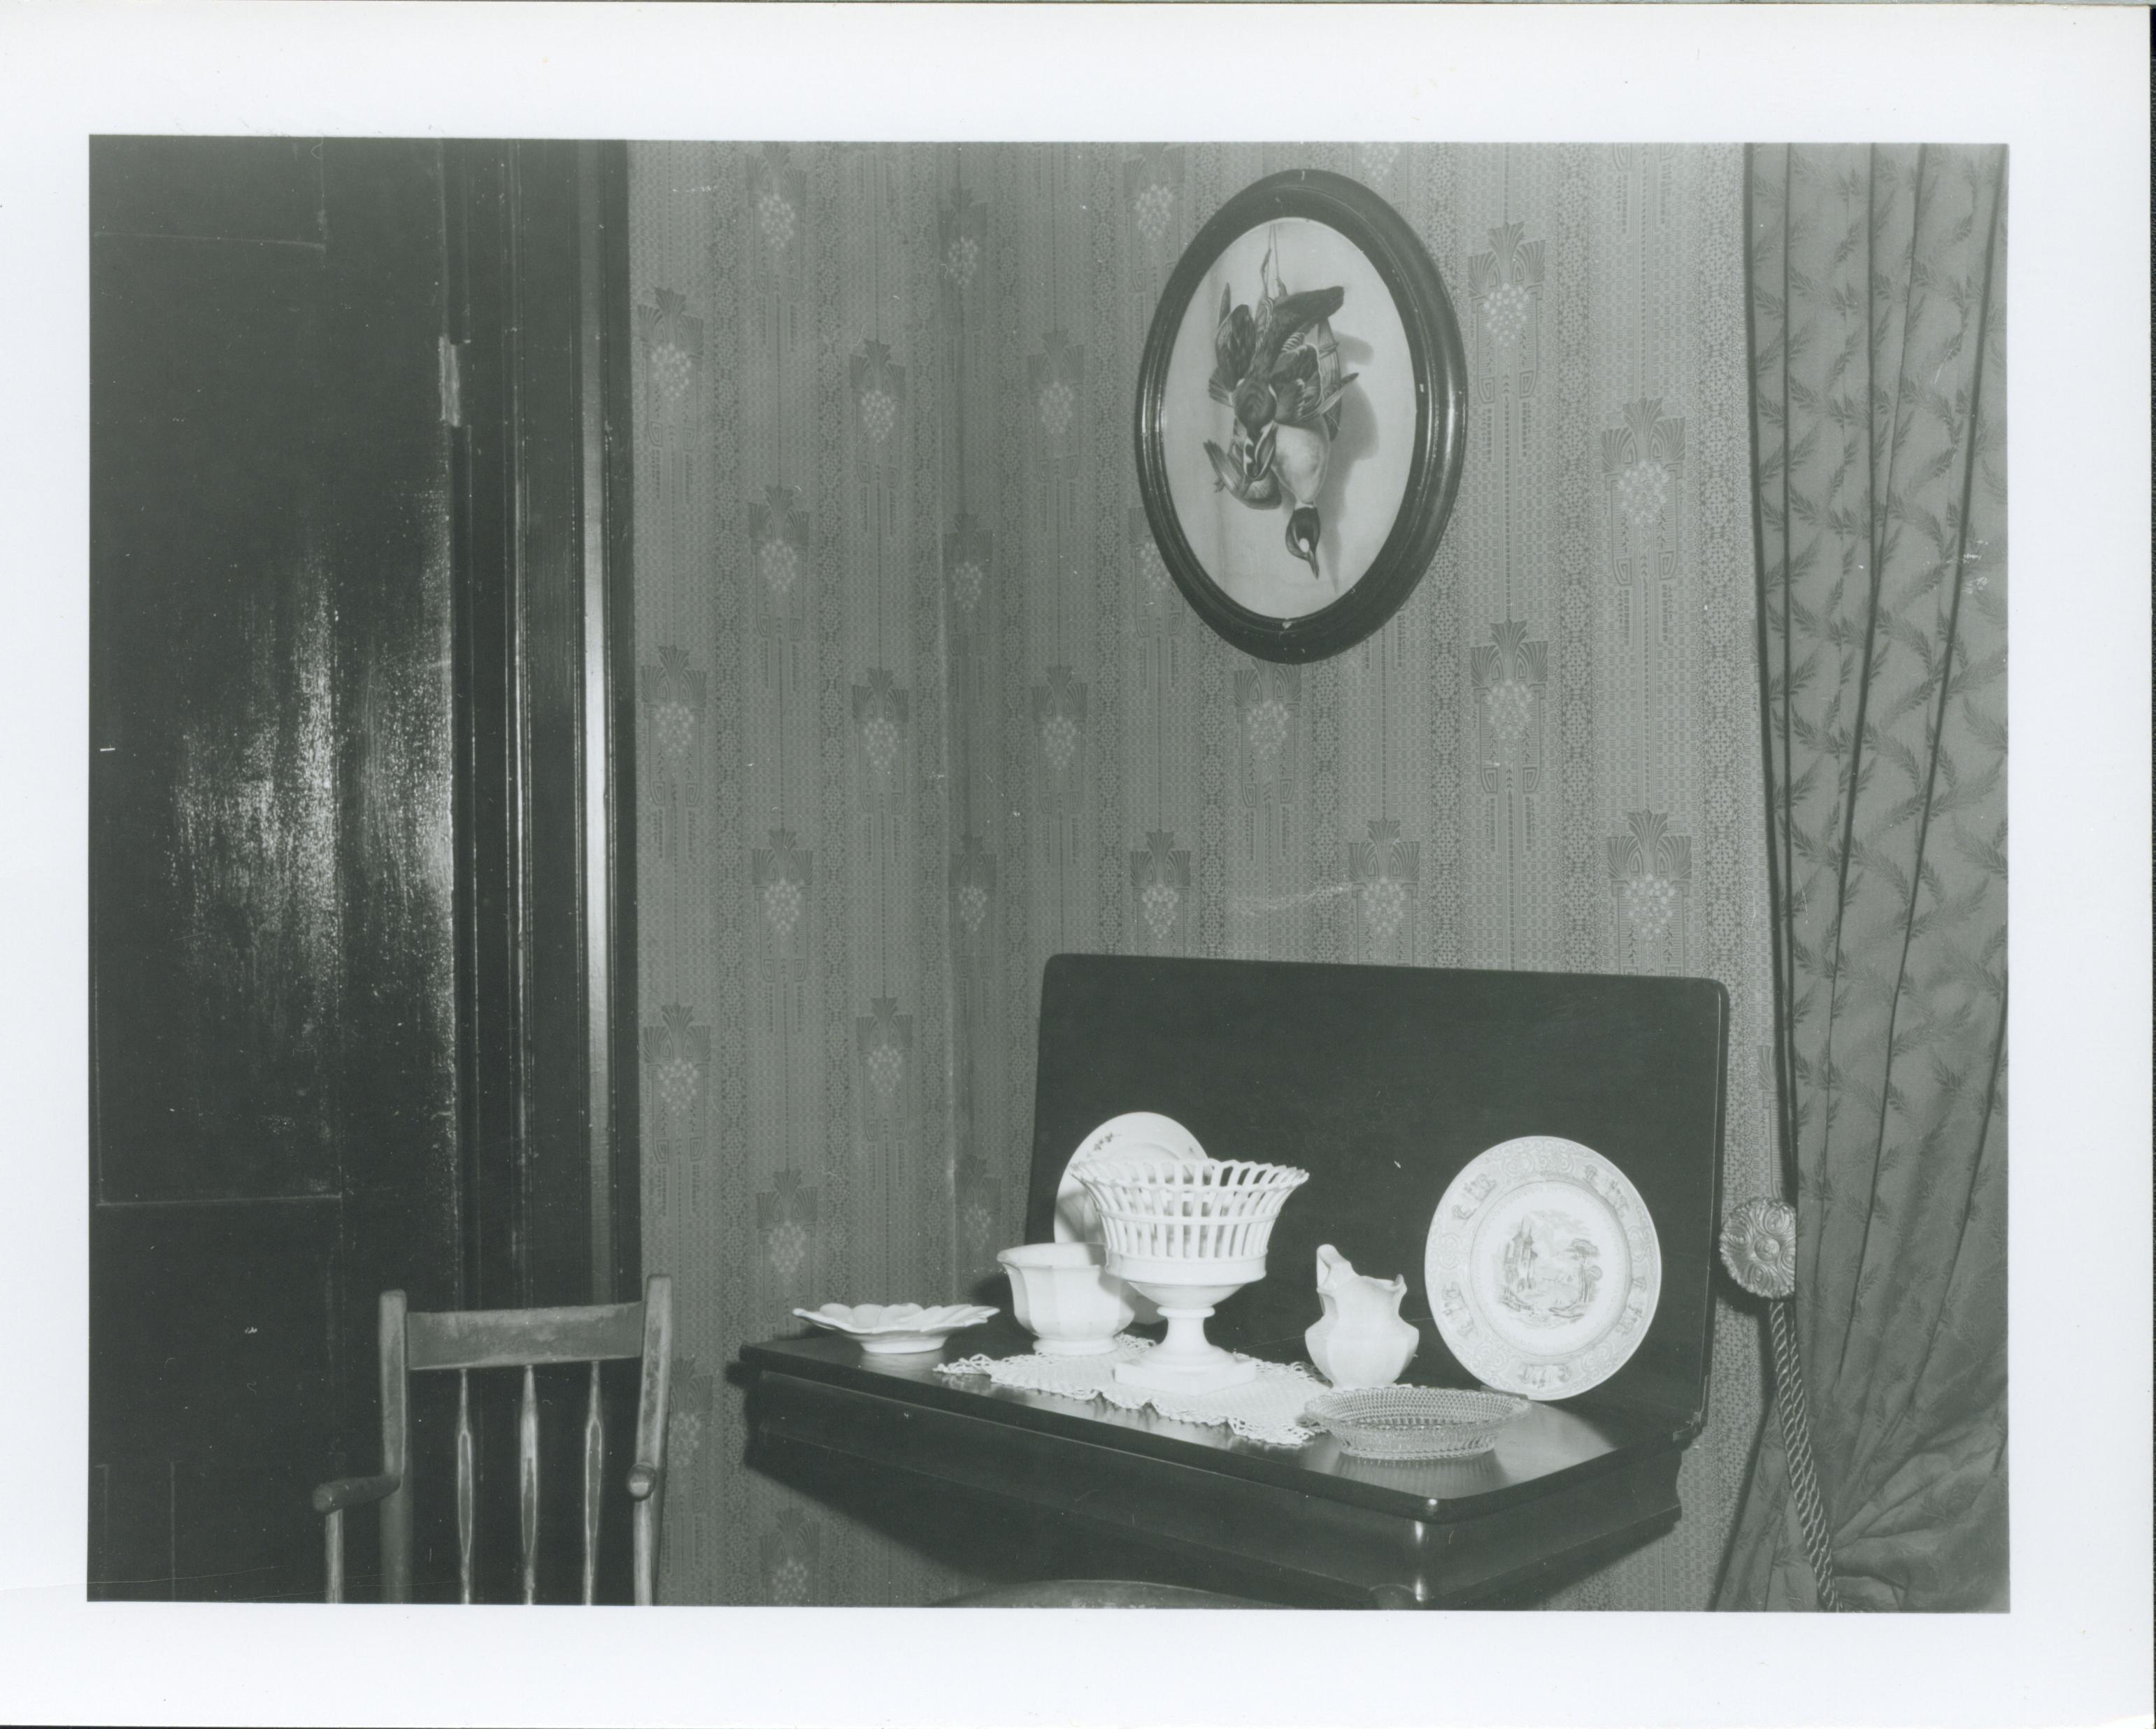 NA Dining Room, Negative # 637, See Classification # 7 Lincoln, home, Dining Room, furnishings